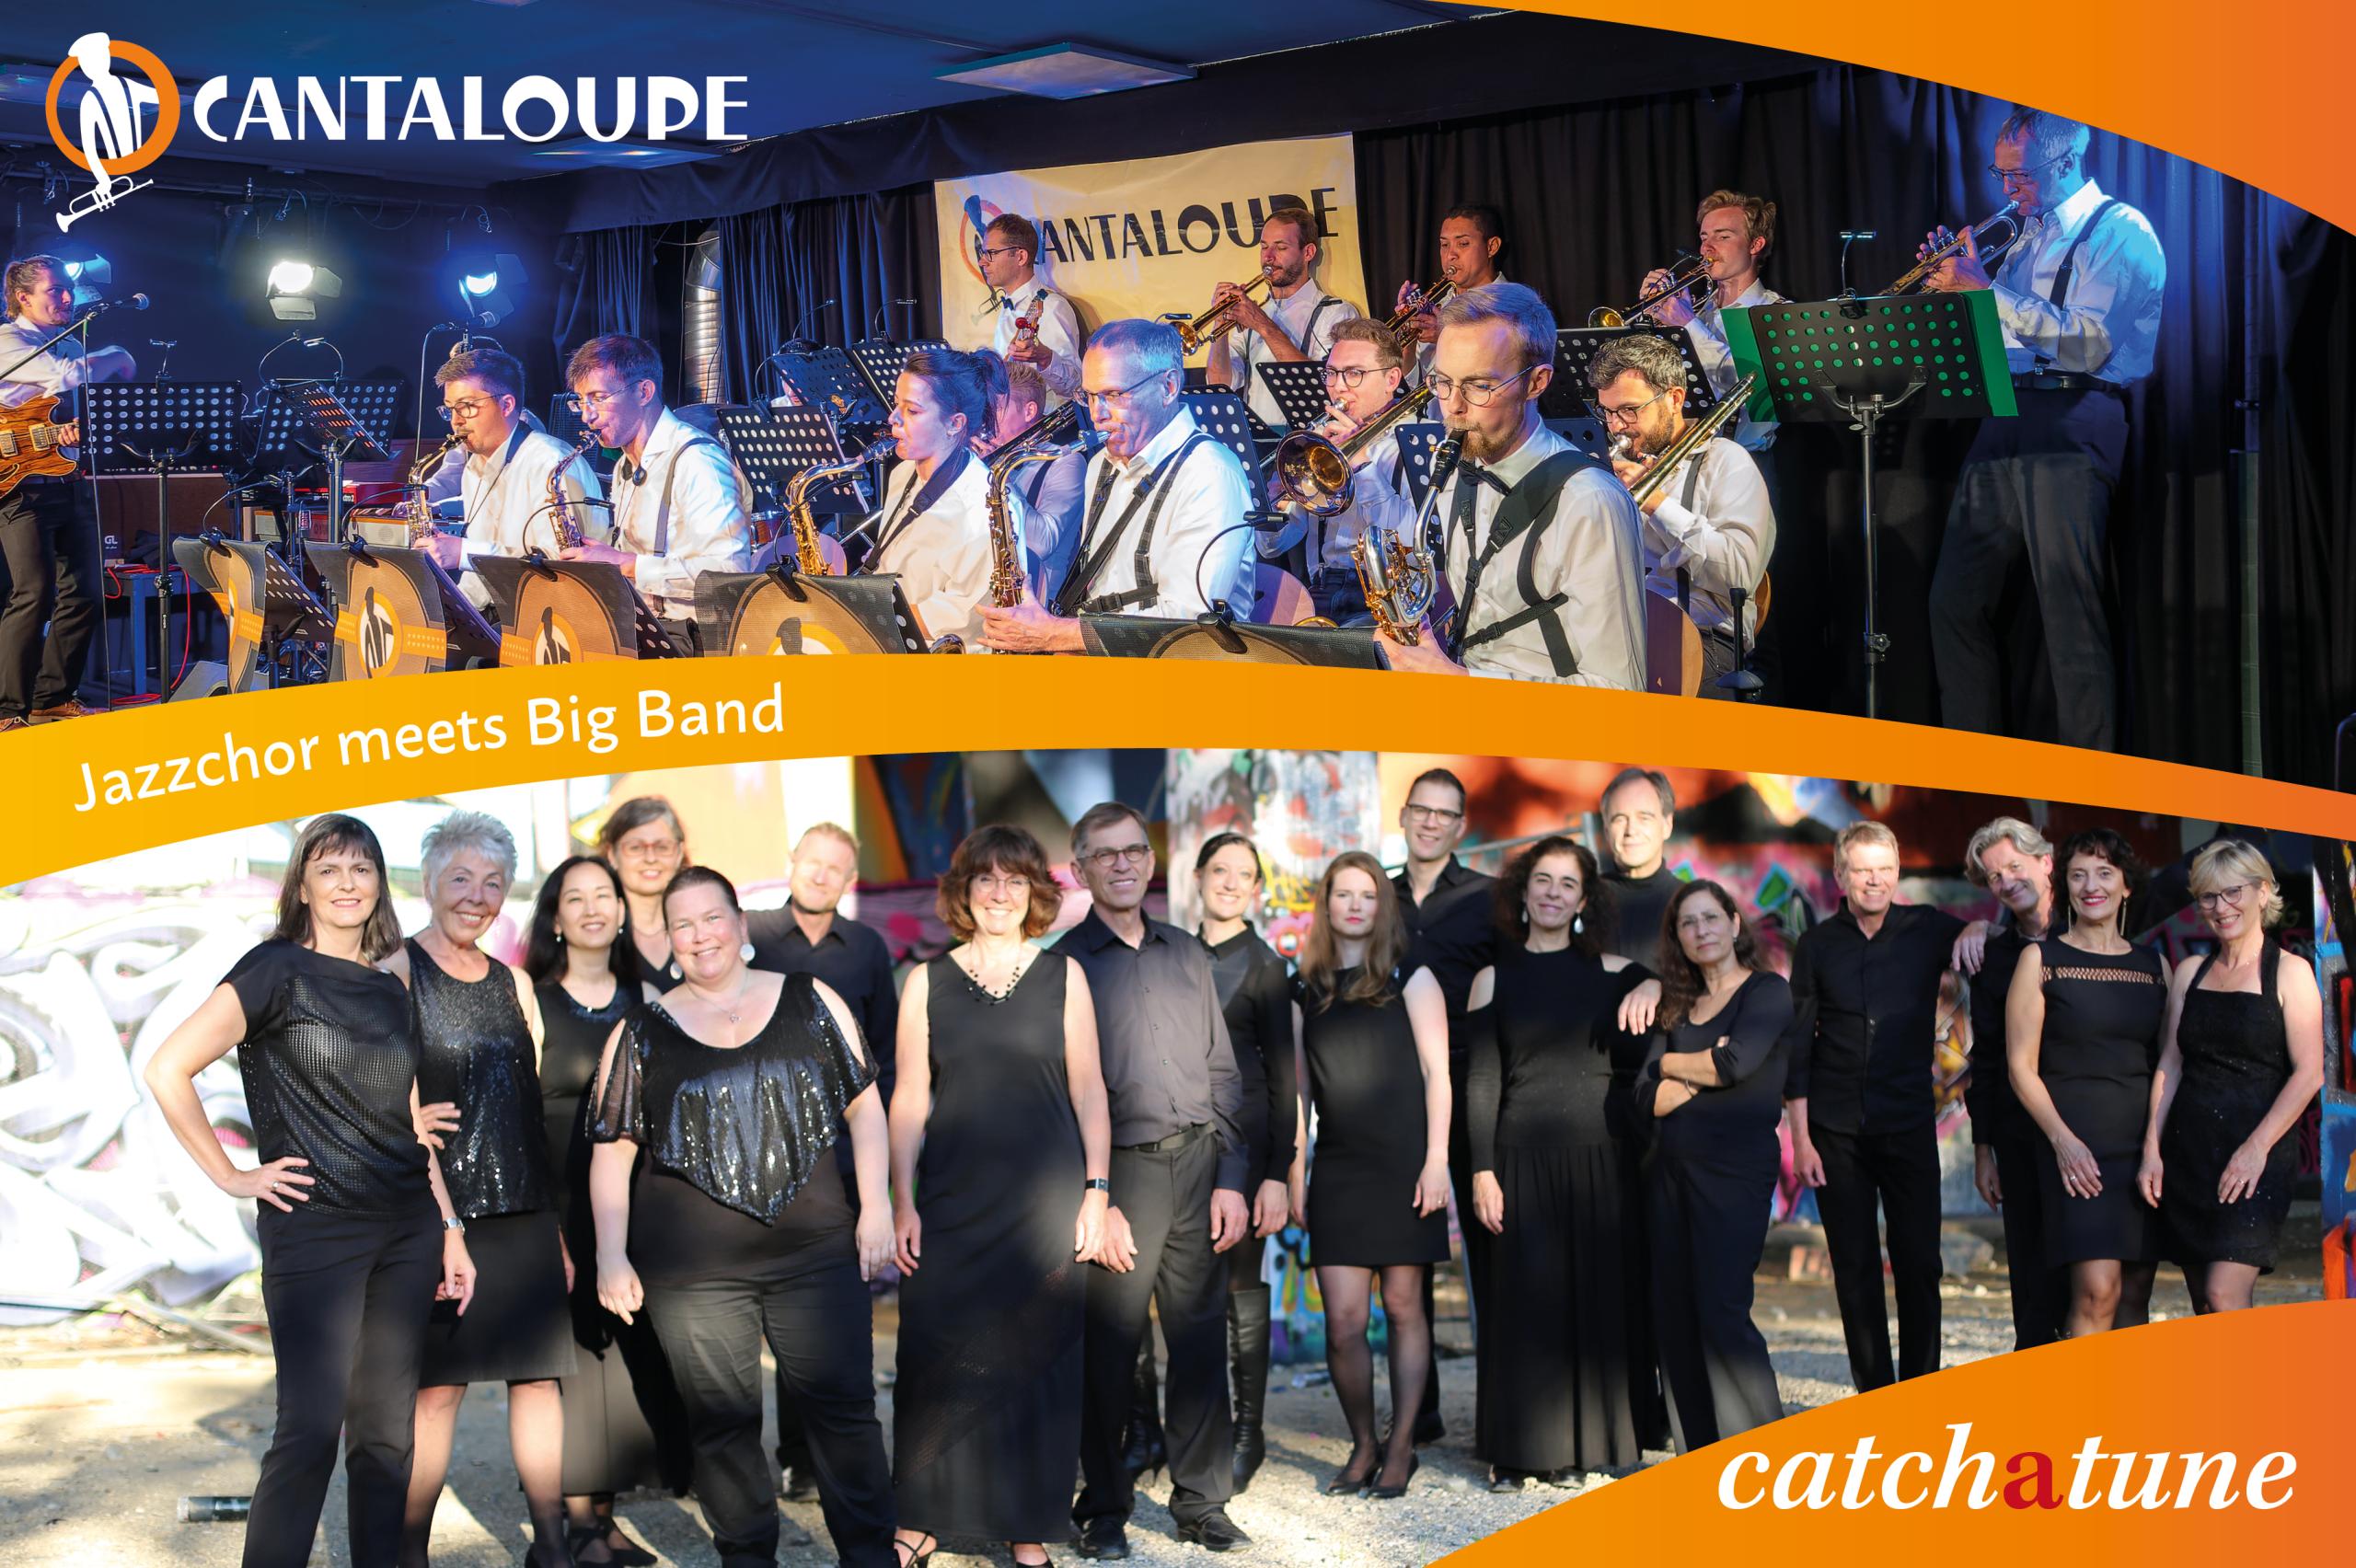 Compilation of two photos. Once a picture of the big band Cantaloupe during a performance and once a group photo of the jazz choir catchatune